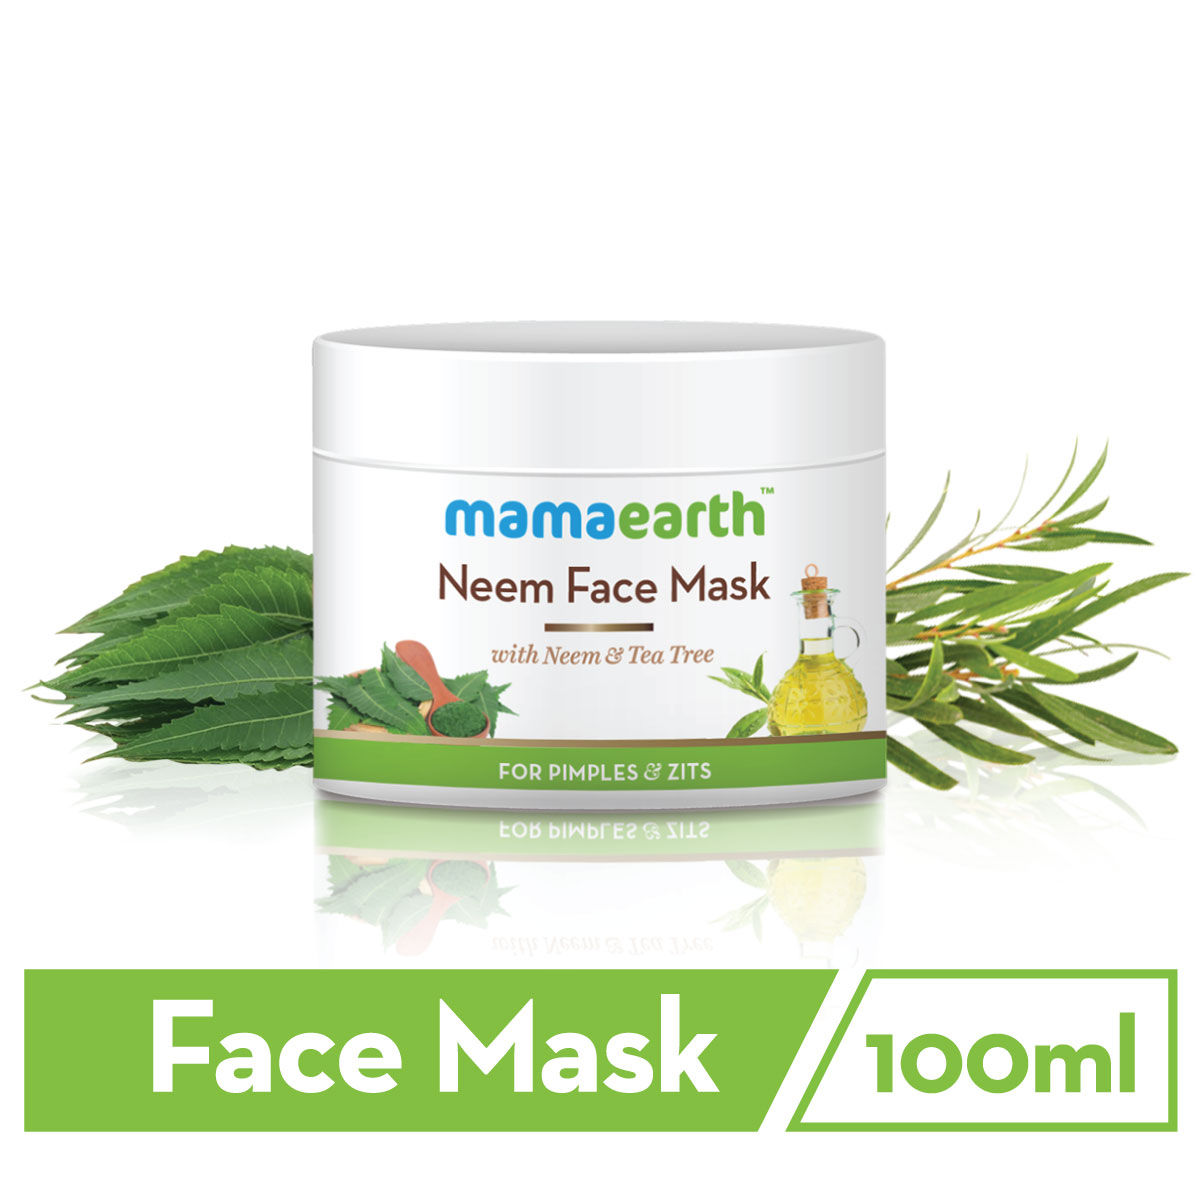 Mamaearth Neem Face Mask With Neem & Tea Tree For Pimples & Zits